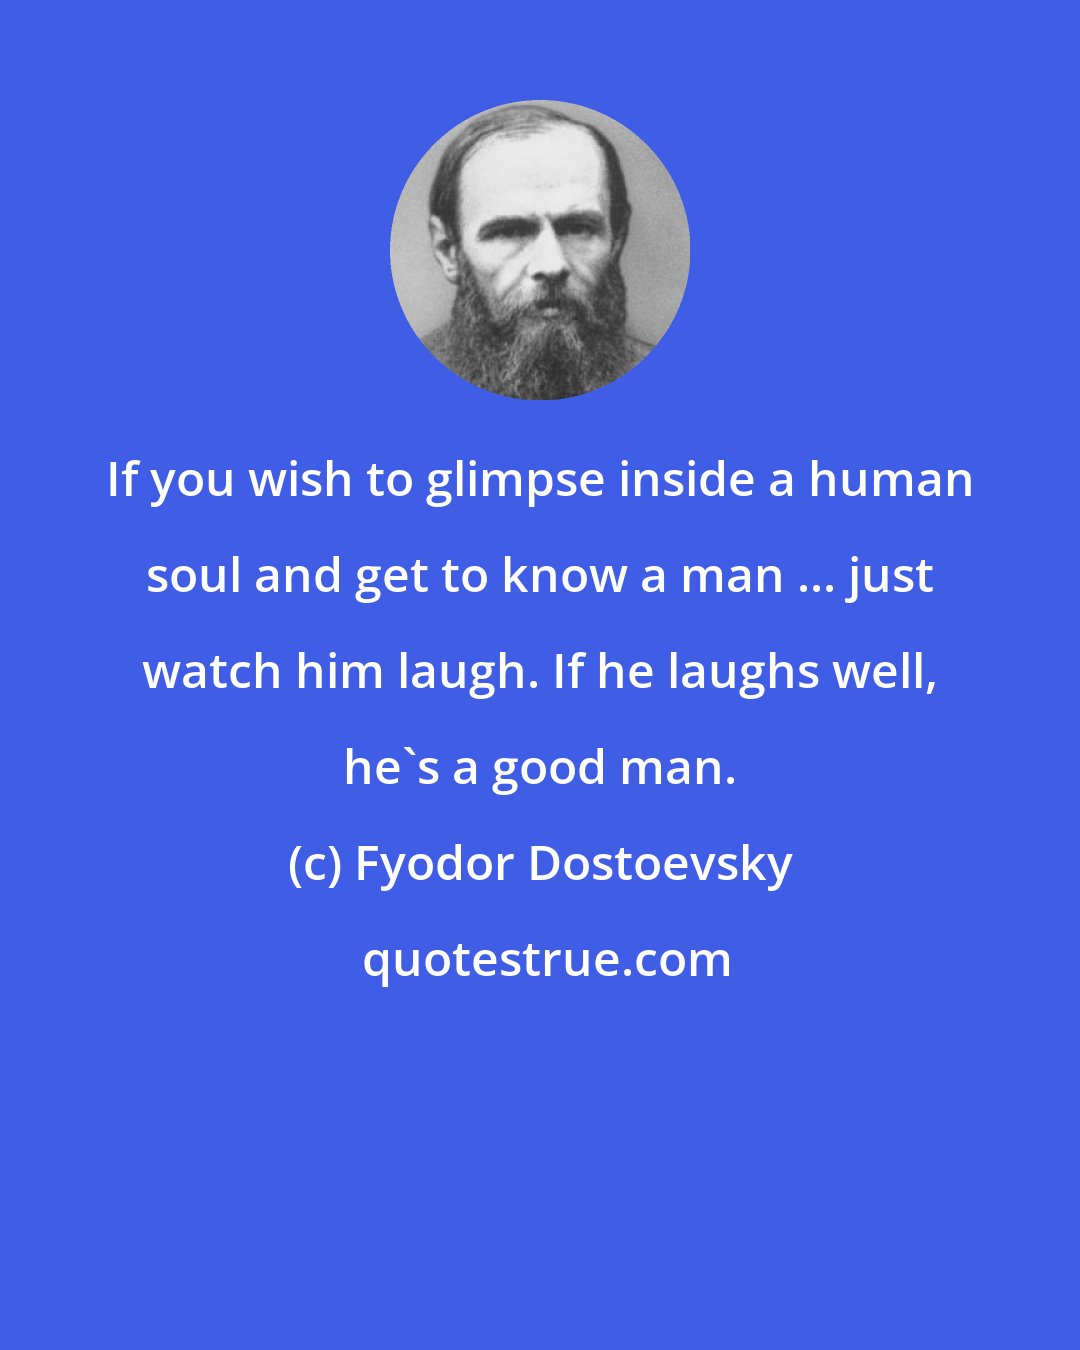 Fyodor Dostoevsky: If you wish to glimpse inside a human soul and get to know a man ... just watch him laugh. If he laughs well, he's a good man.